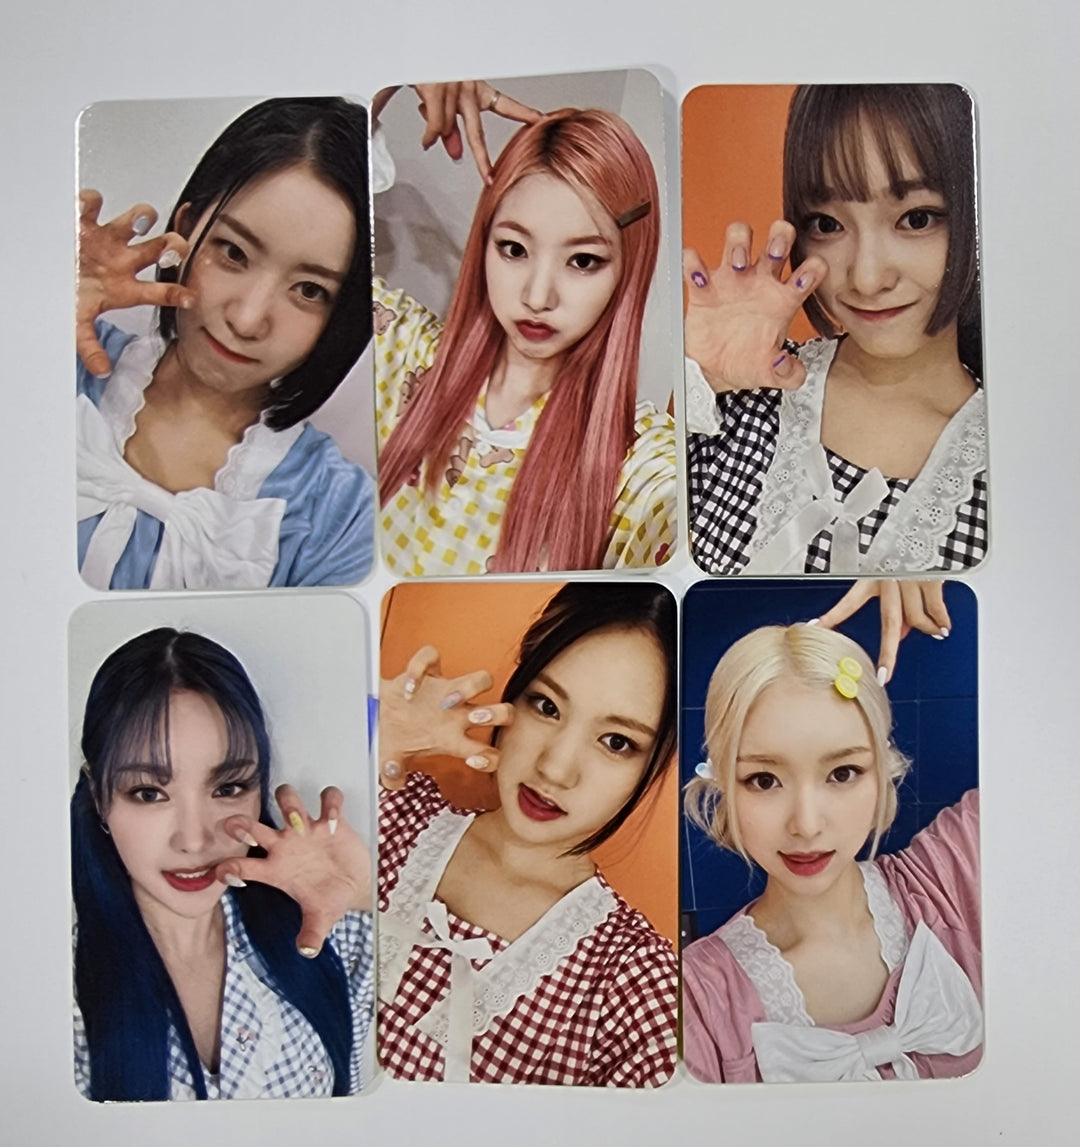 Dream Note 'Secondary Page'  - Daily Duck Fansign Event Photocard